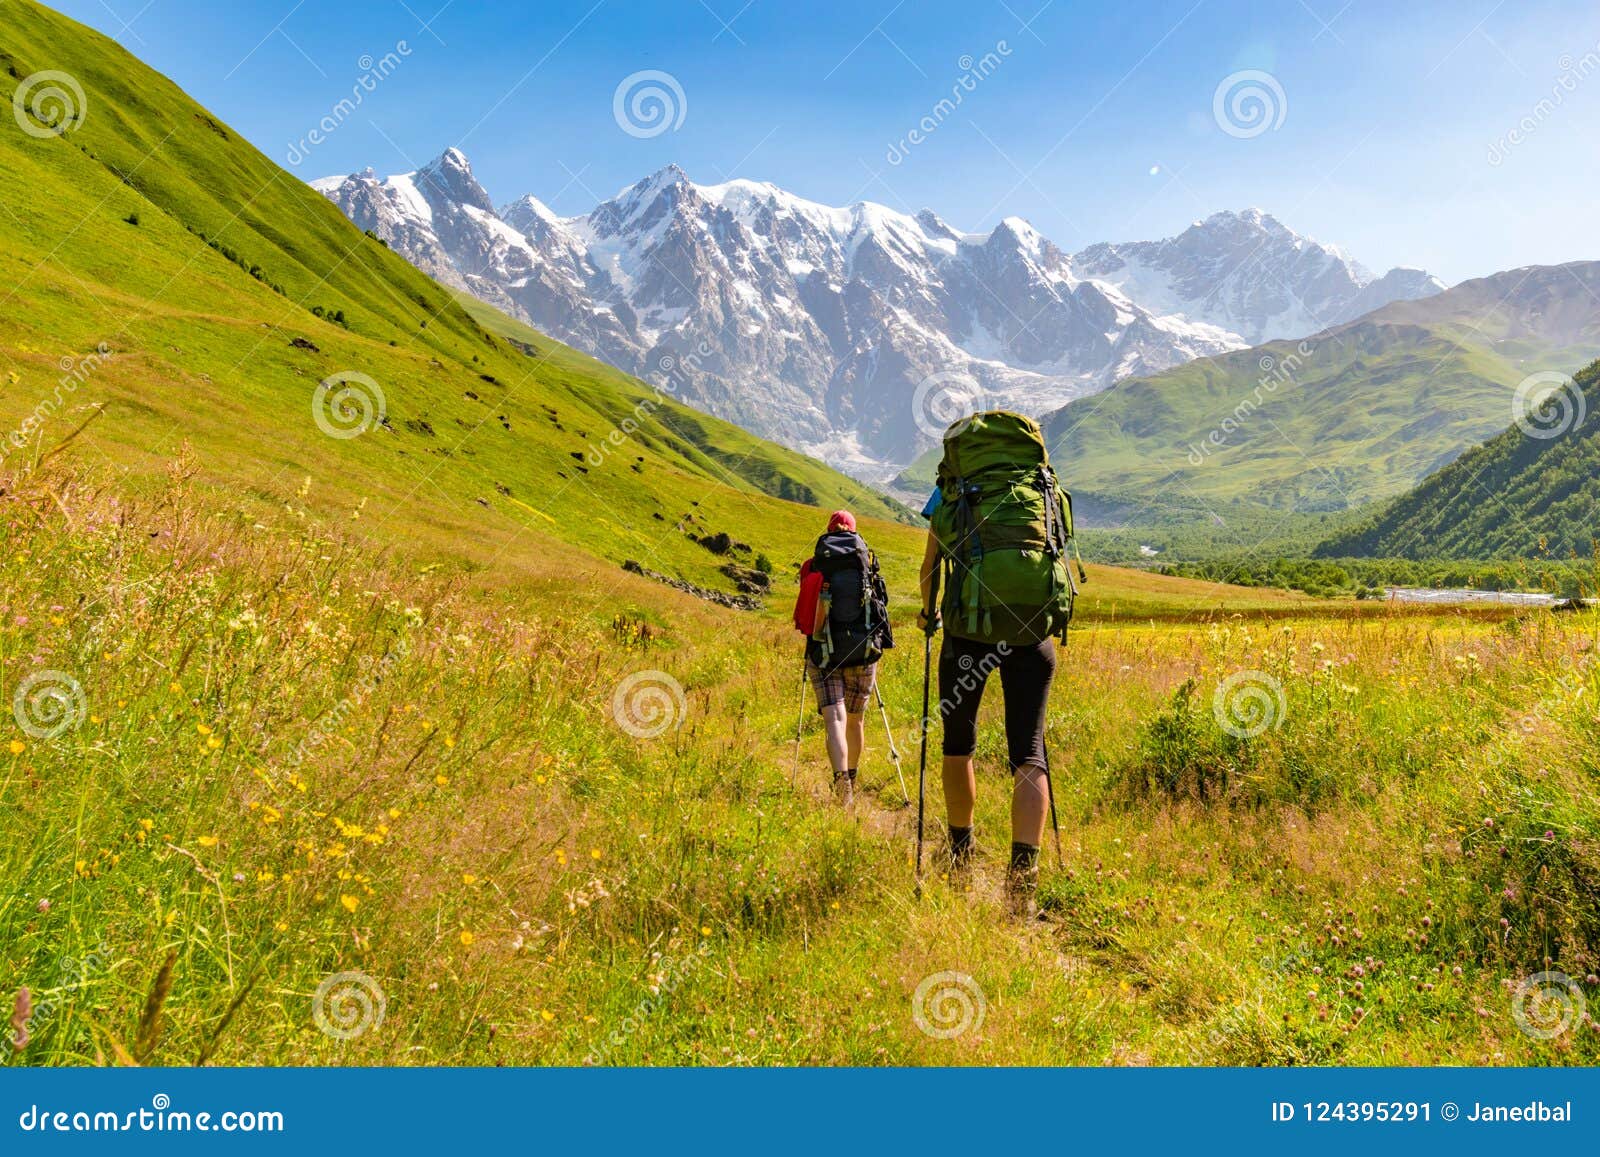 young active girls hiking in greater caucasus mountains, mestia district, svaneti, georgia